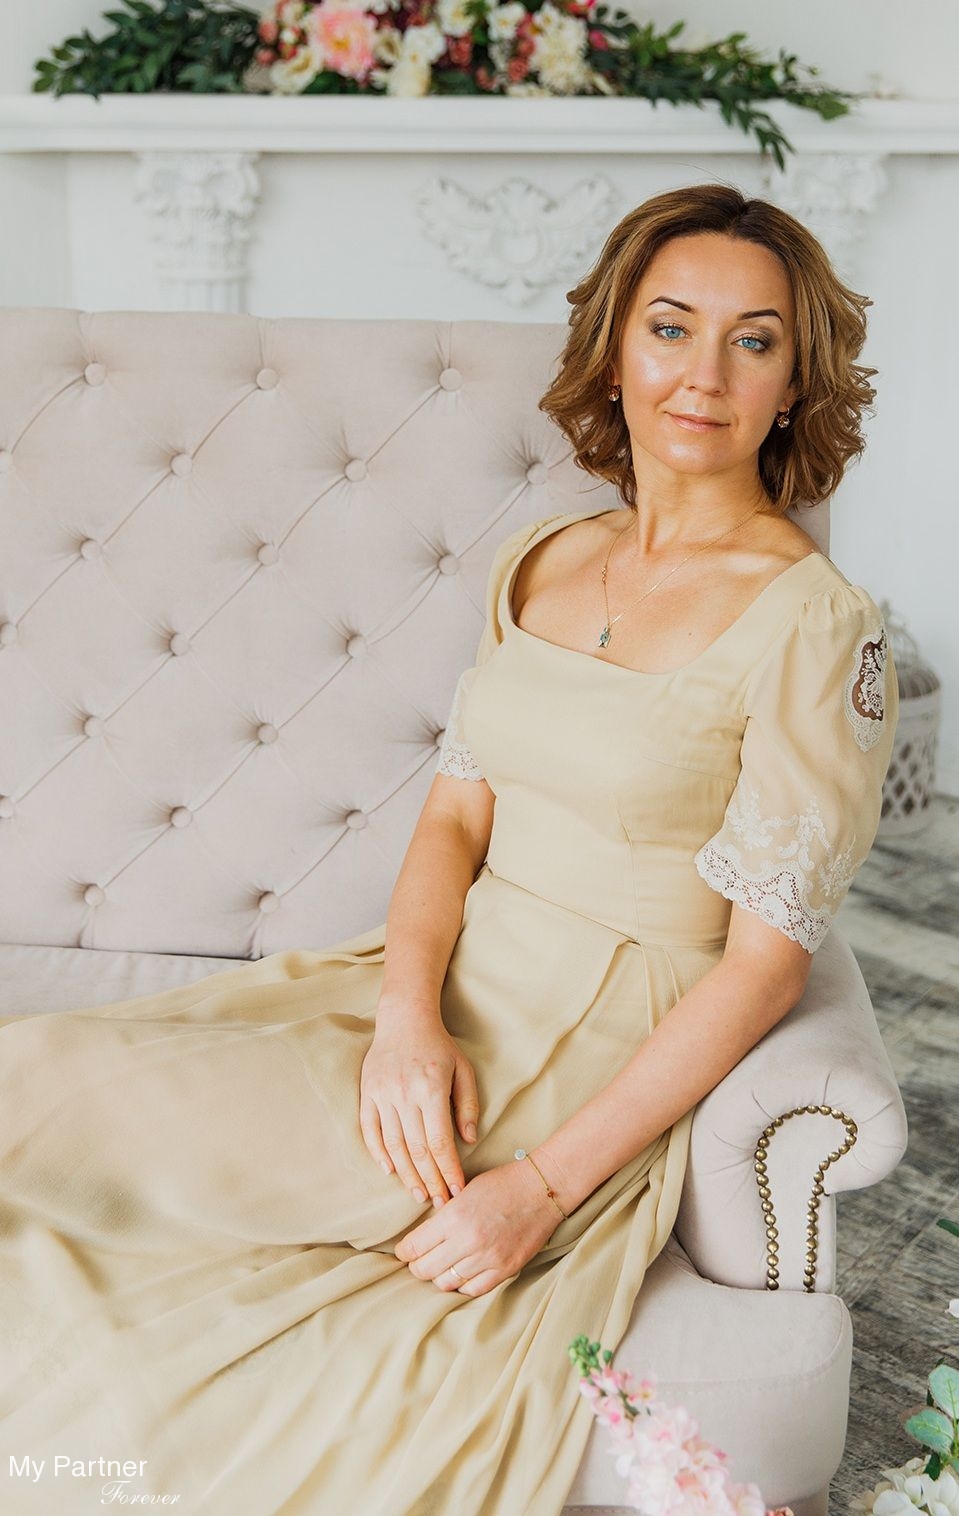 Russian Woman Marriage Agency And 67